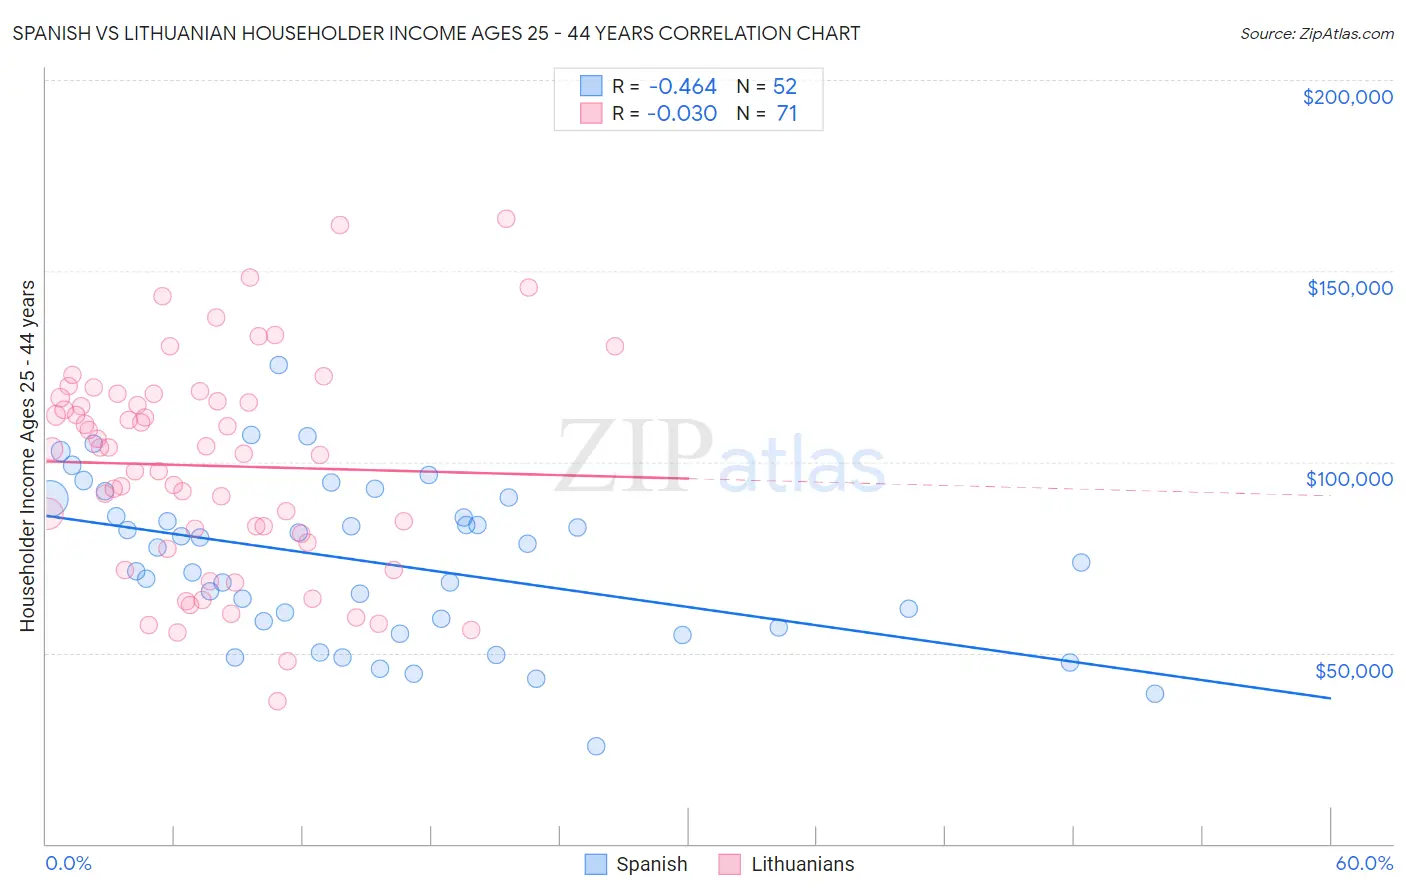 Spanish vs Lithuanian Householder Income Ages 25 - 44 years